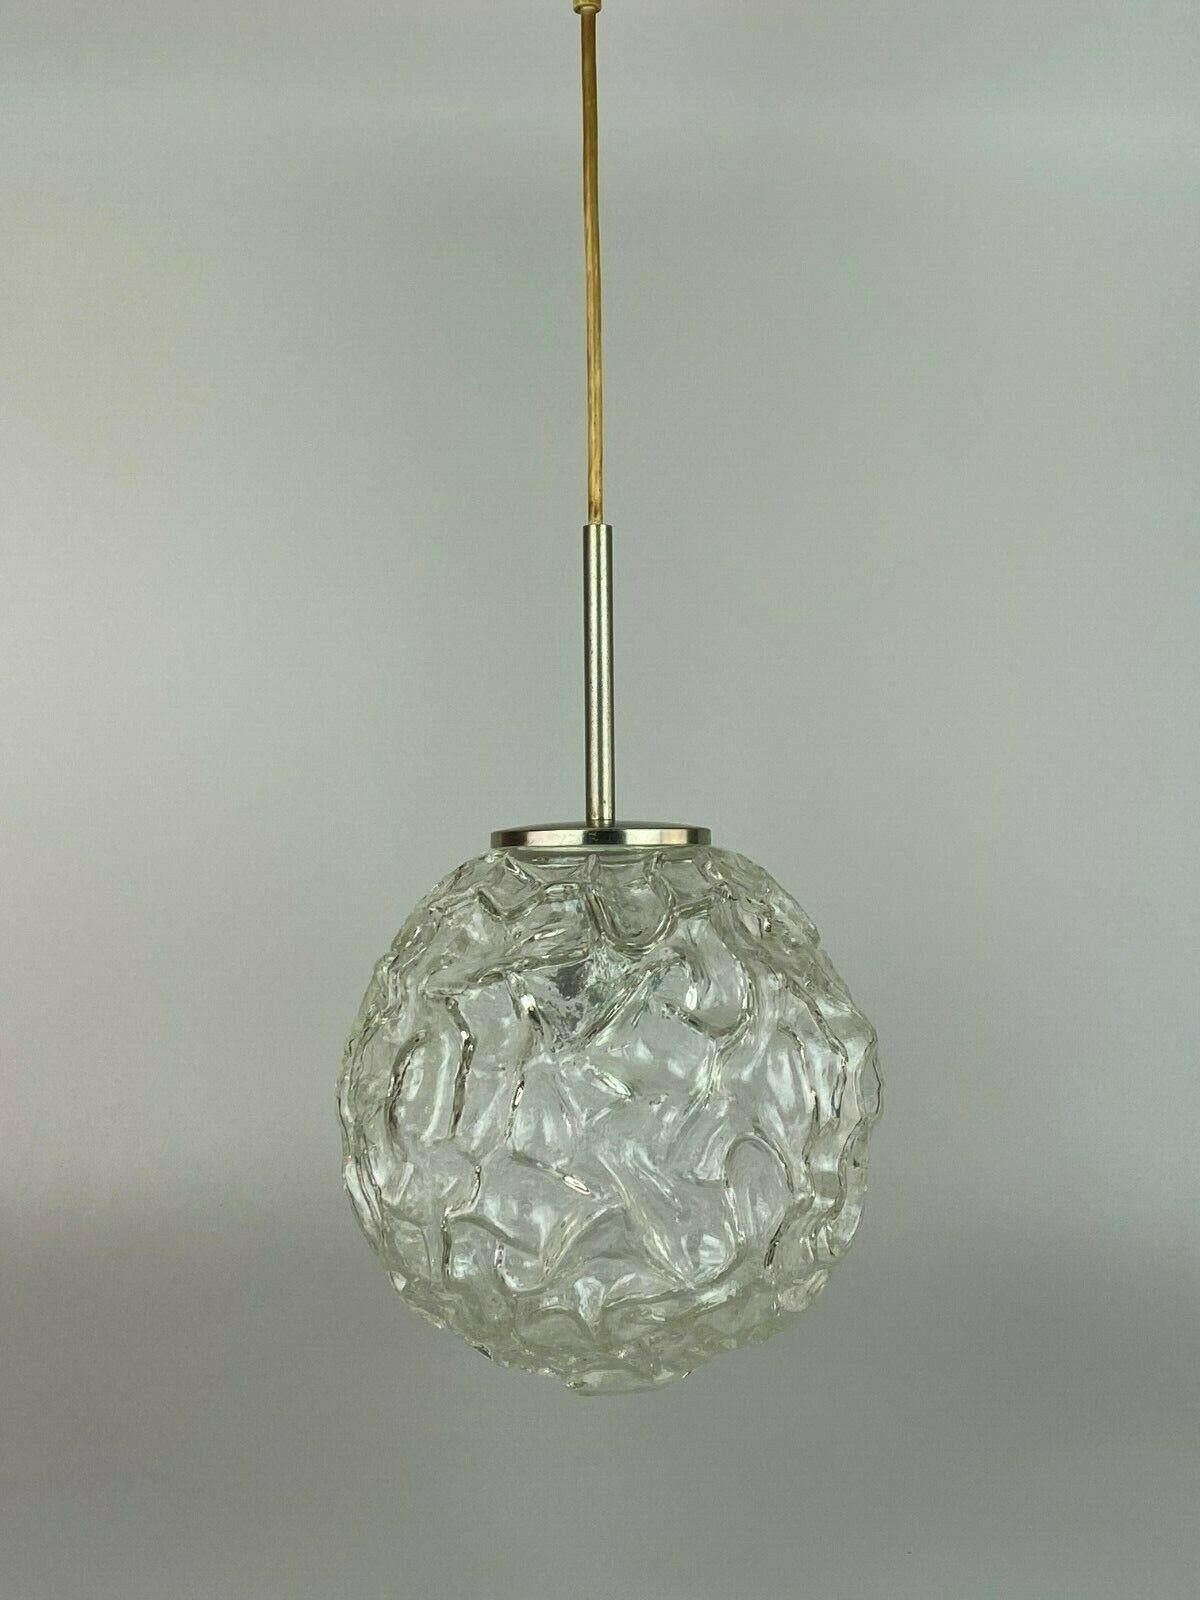 60s 70s lamp light ceiling lamp hanging lamp Hillebrand glass space age design

Object: hanging lamp

Manufacturer: Hillebrand

Condition: good - vintage

Age: around 1960-1970

Dimensions:

Diameter = 24cm
Height = 70cm

Other